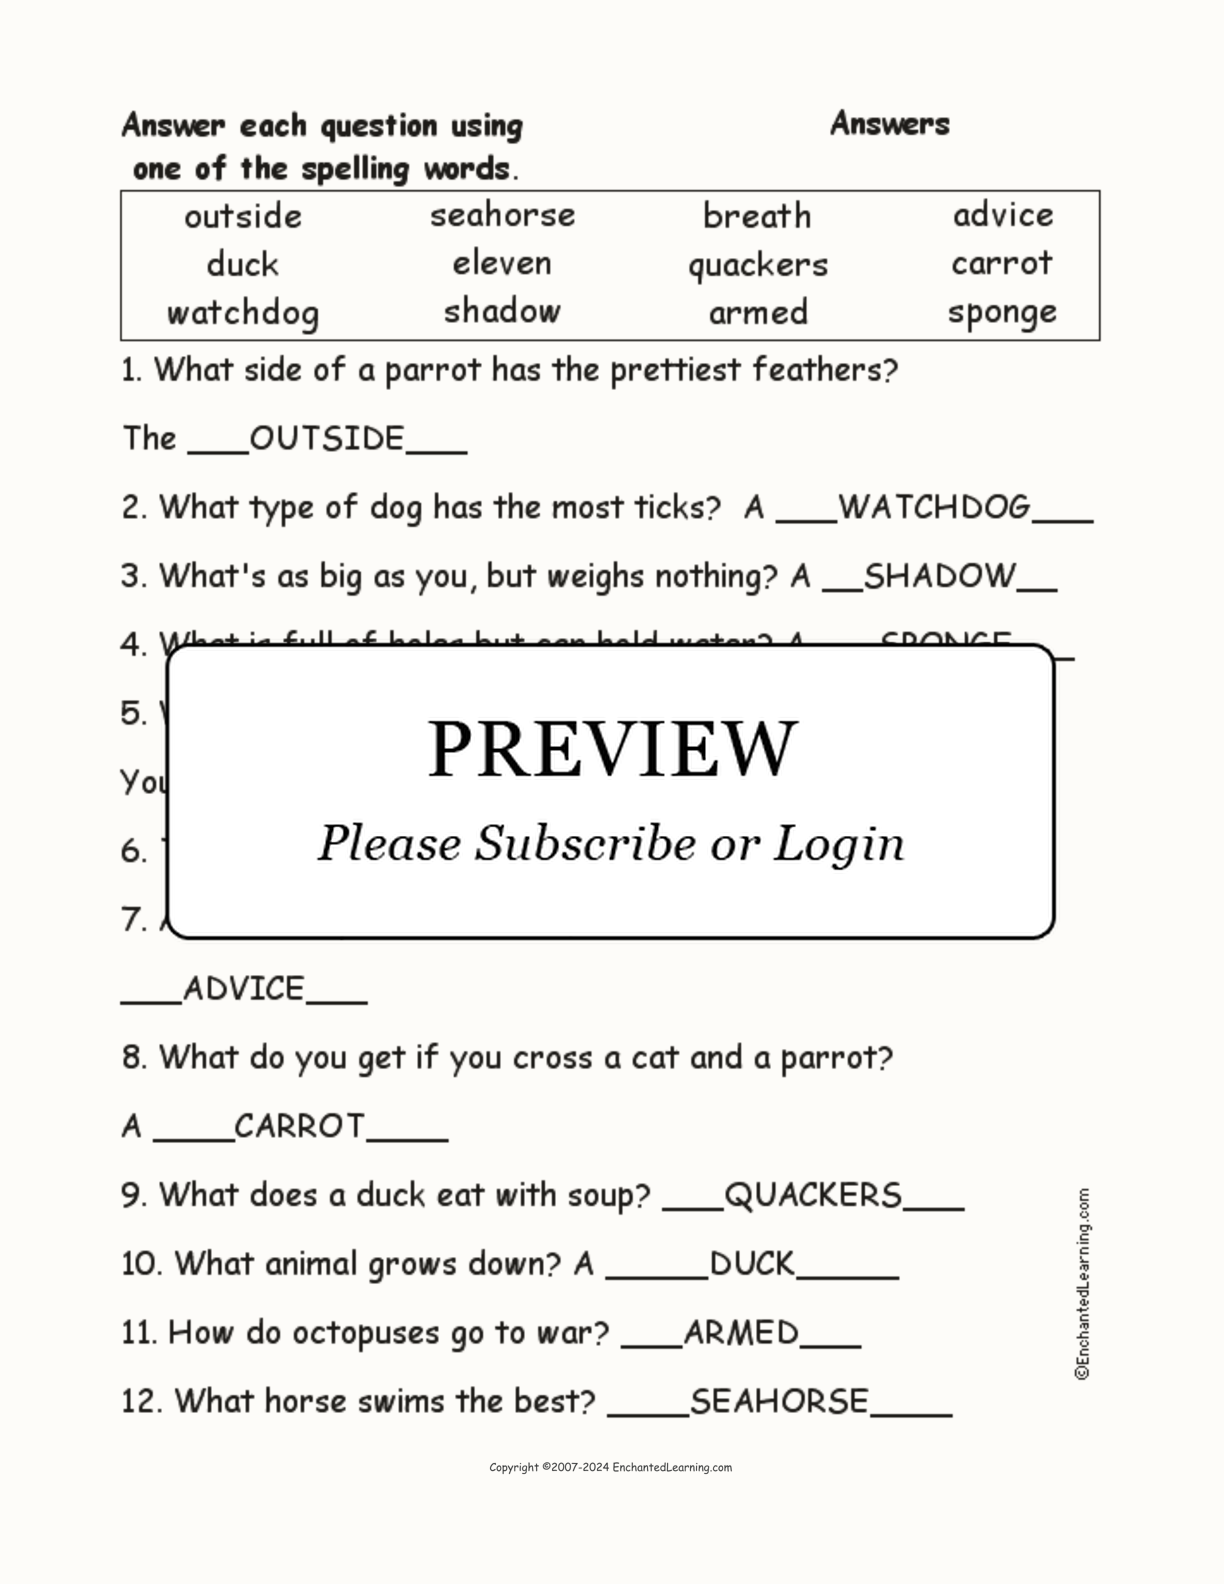 April Fool's Day Spelling Word Questions interactive worksheet page 2